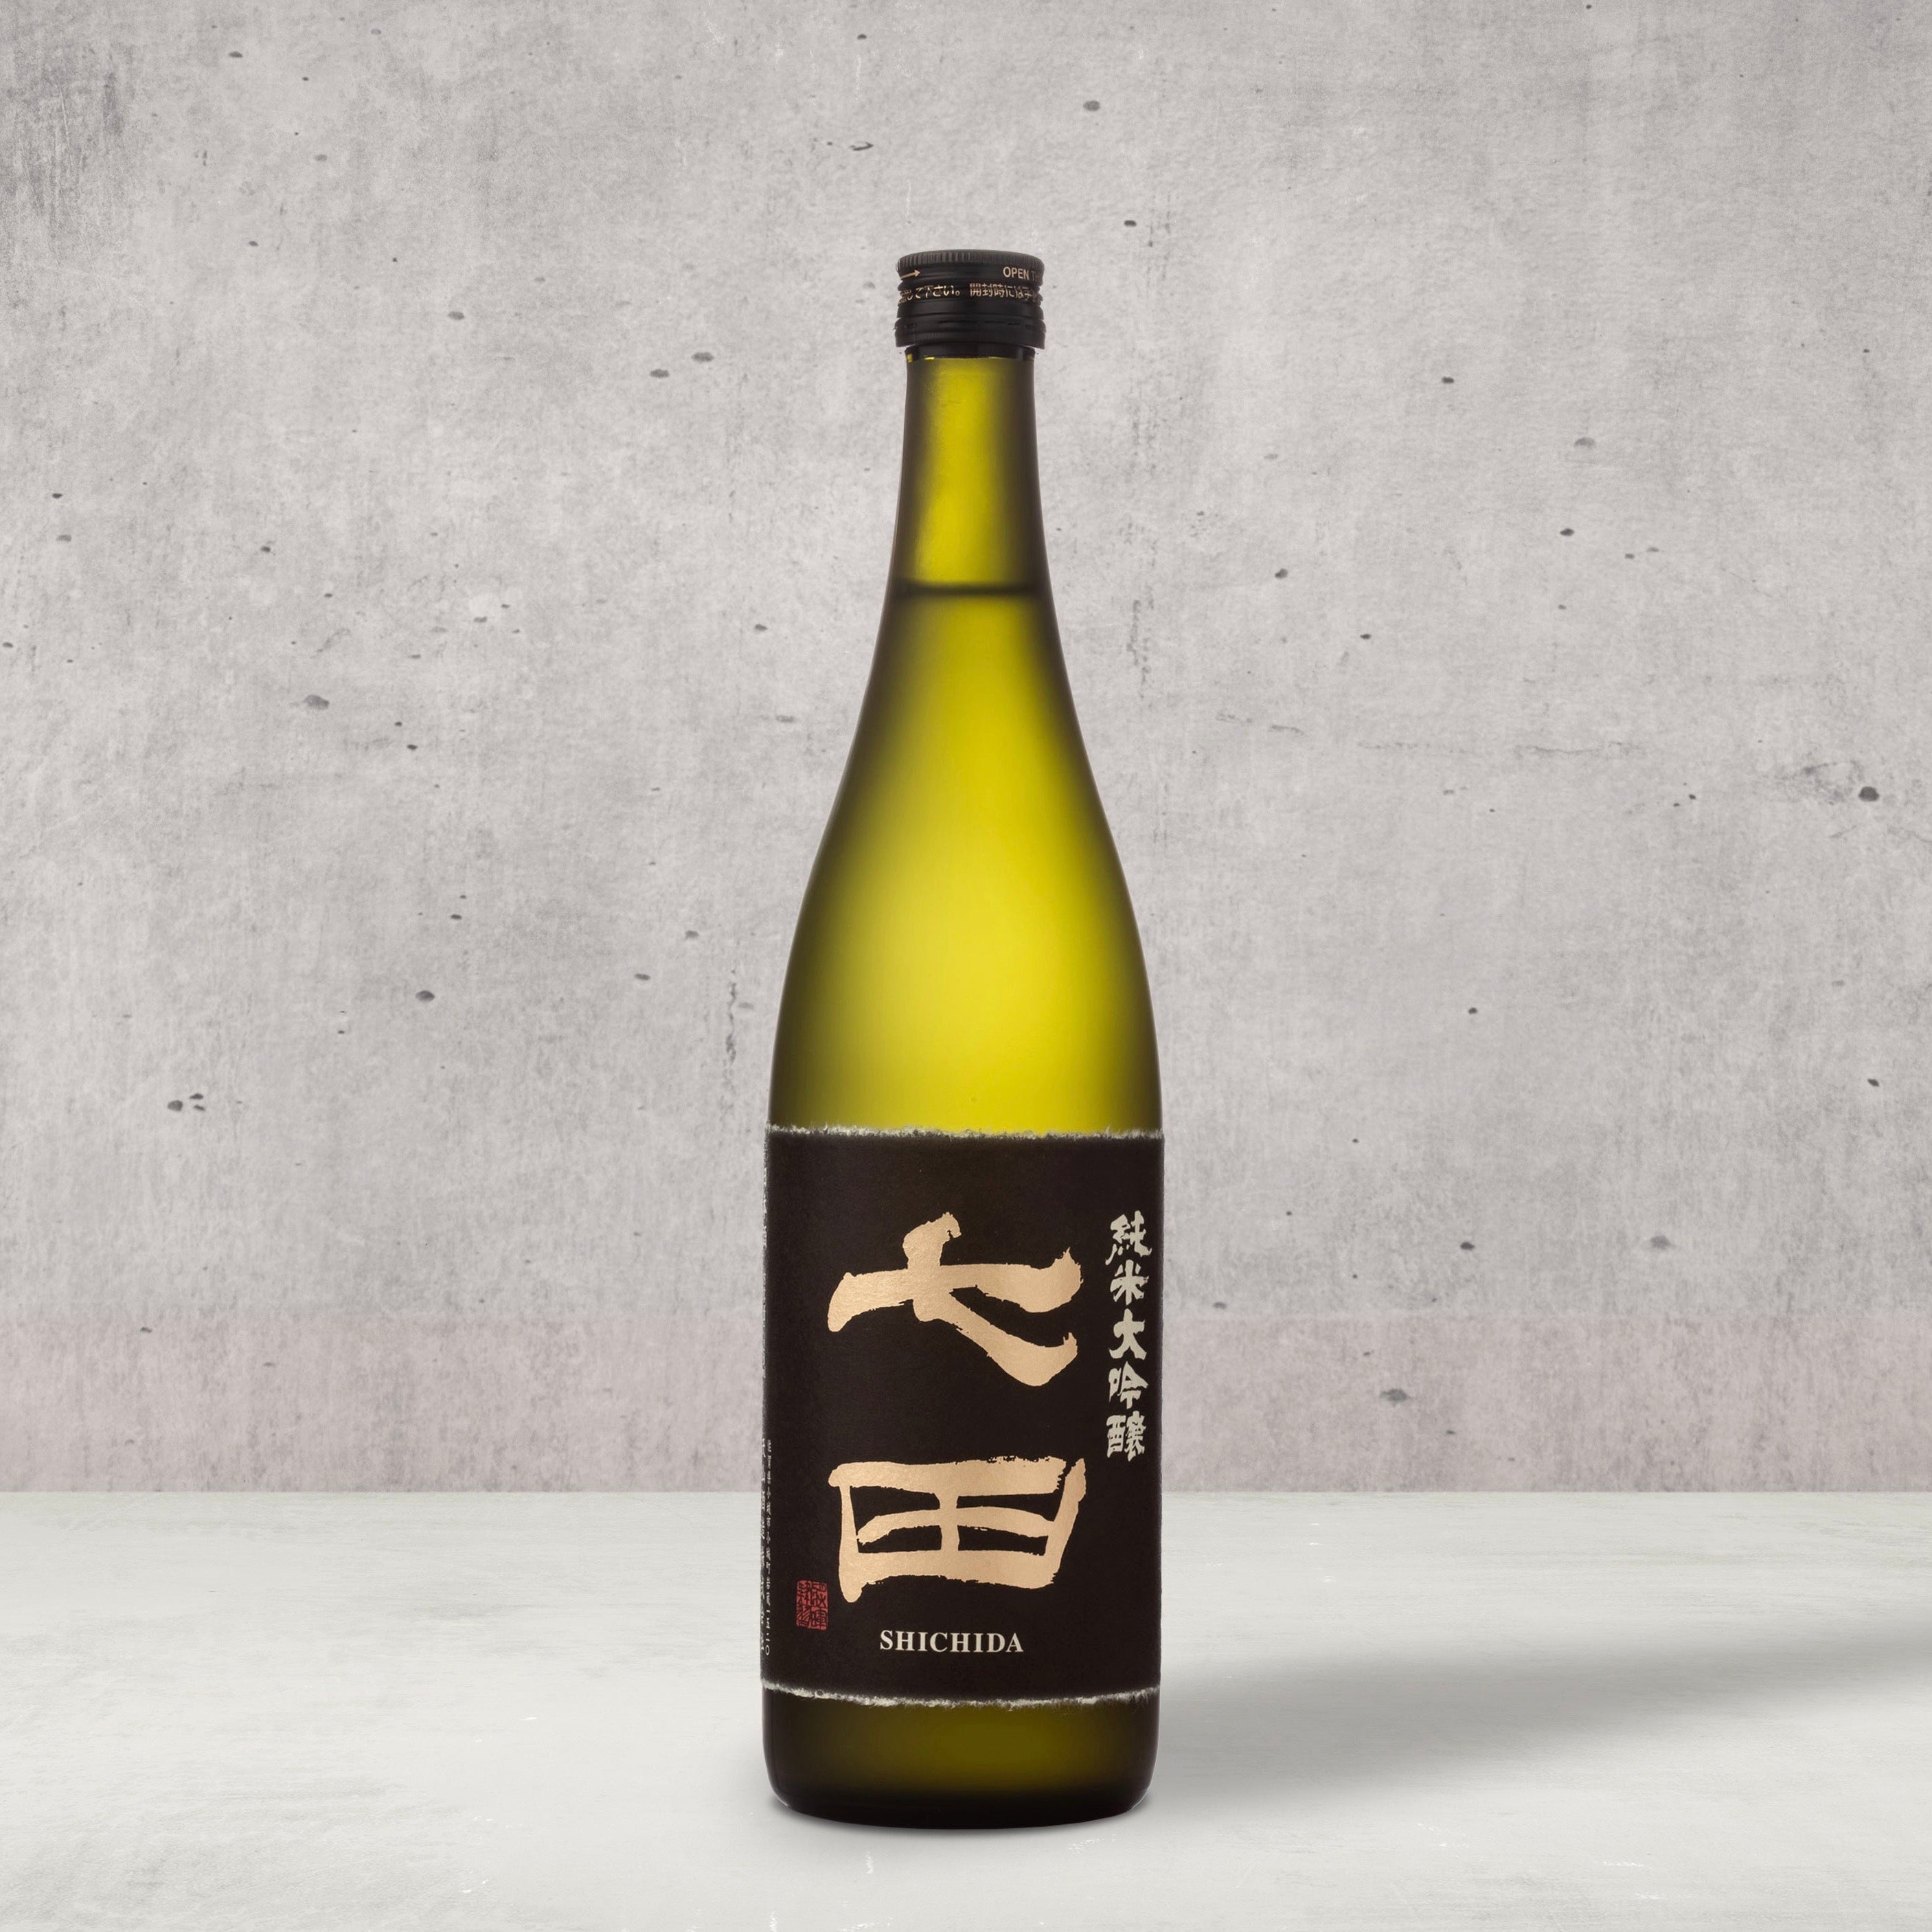 Shichida Junmai Daiginjo Sake. The most luxurious of the Shichida series, a Junmai Daiginjo packed with Shichida’s classic umami flavor. Initially fruity and complex, but turns dryer and straight forward as you taste—it's like two sakes in one! Go ahead, here's your chance to have and eat your cake. Gold Award in the 2018 Kura Master Competition in the Junmai Daiginjo and Junmai Ginjo Division. 